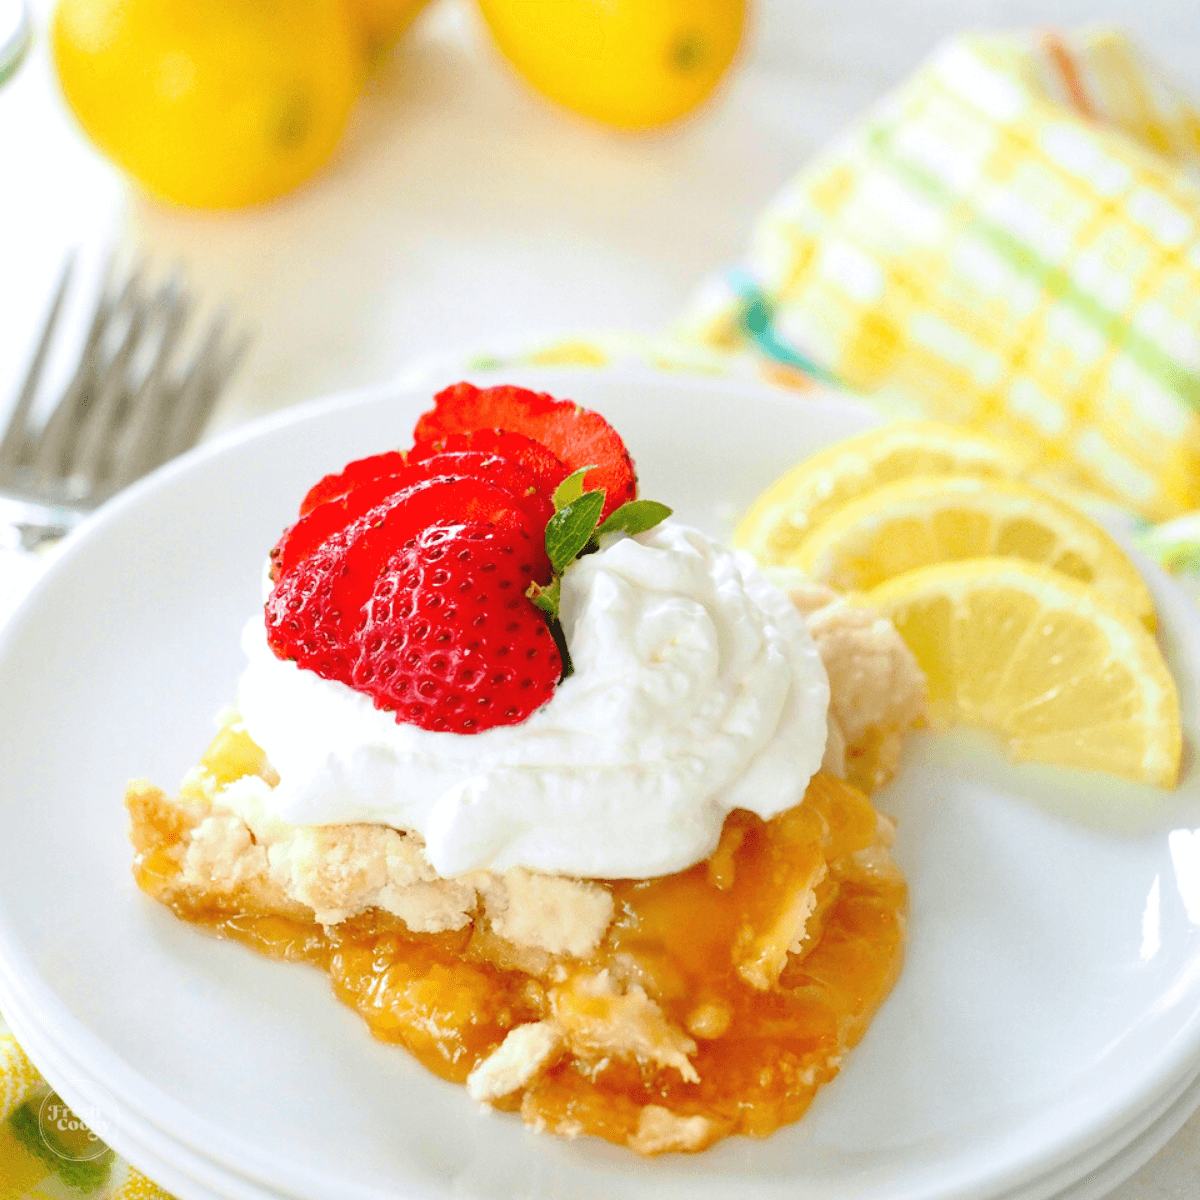 Lemon dump cake serving on plate with whipped cream and sliced strawberry.